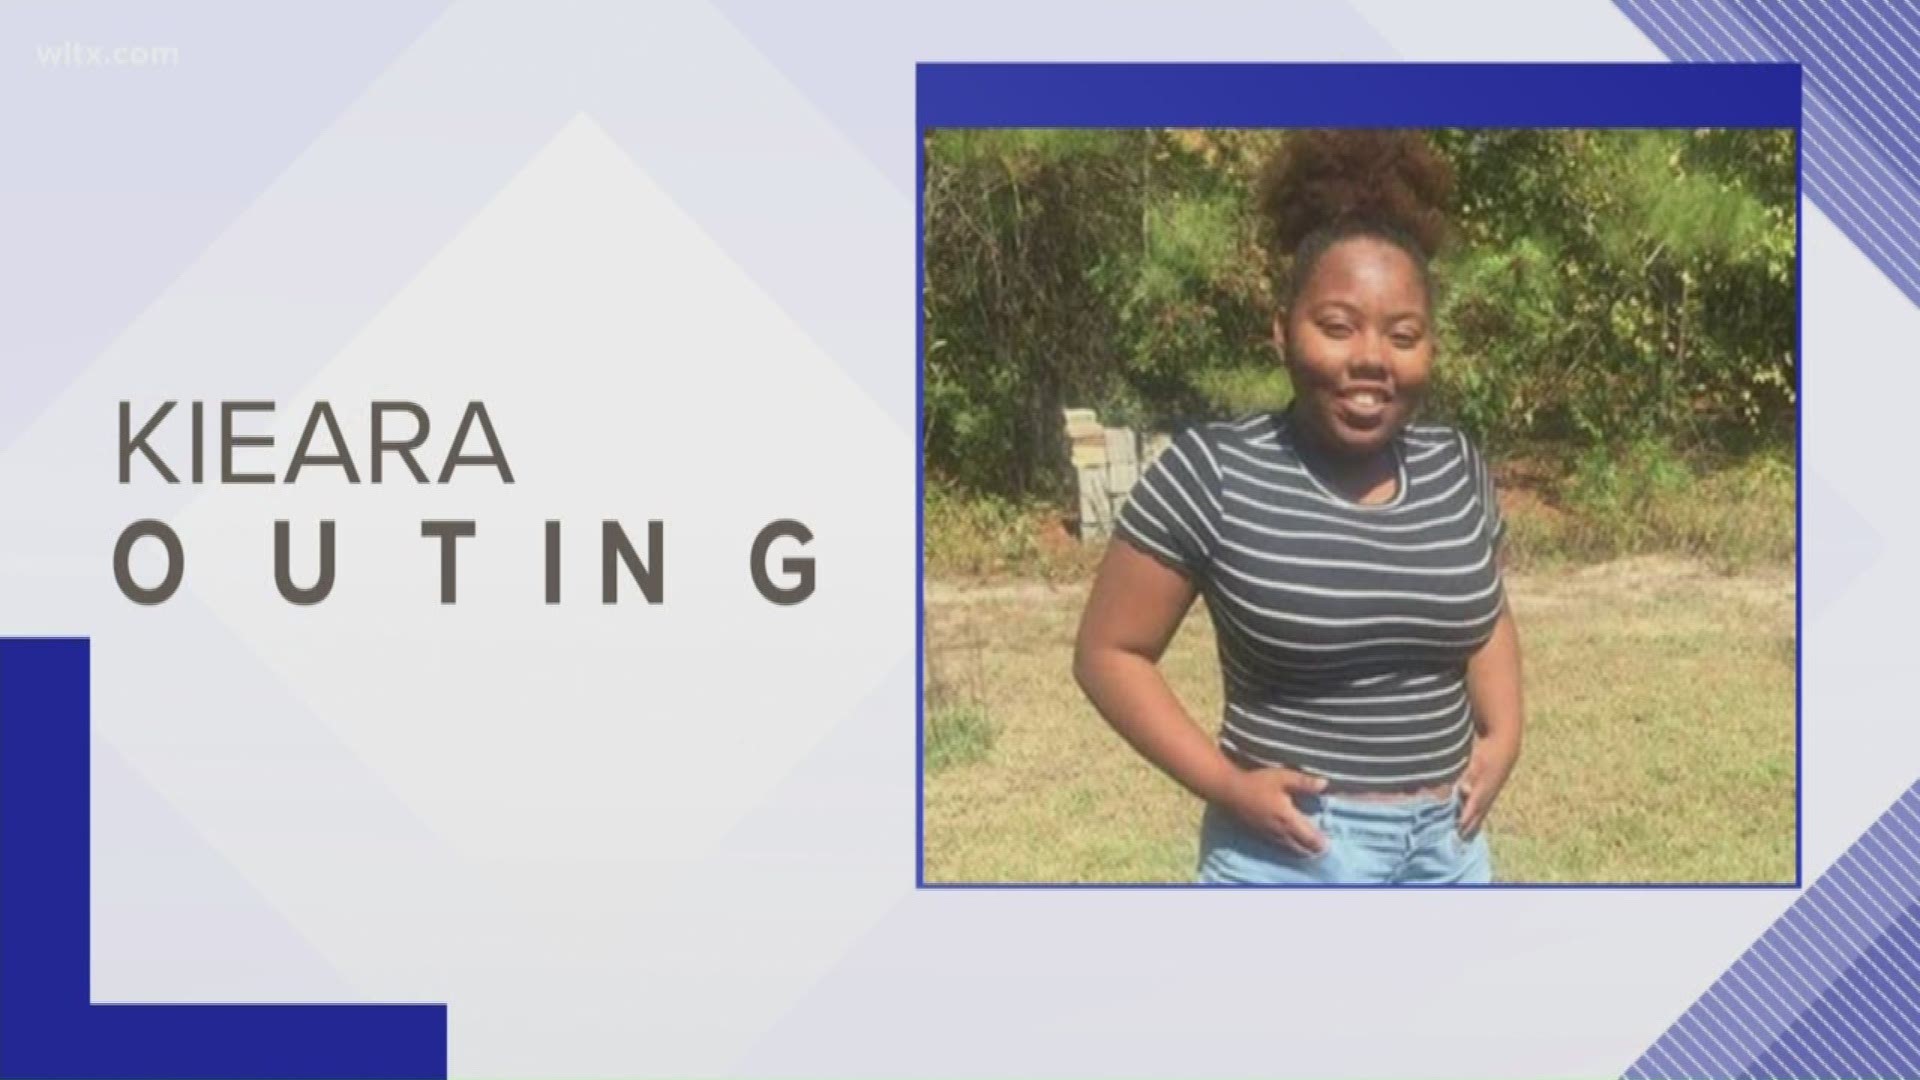 The Richland County Sheriff's Department is looking for a missing 16-year-old girl, Kieara Outing,  who doesn't have her medication.